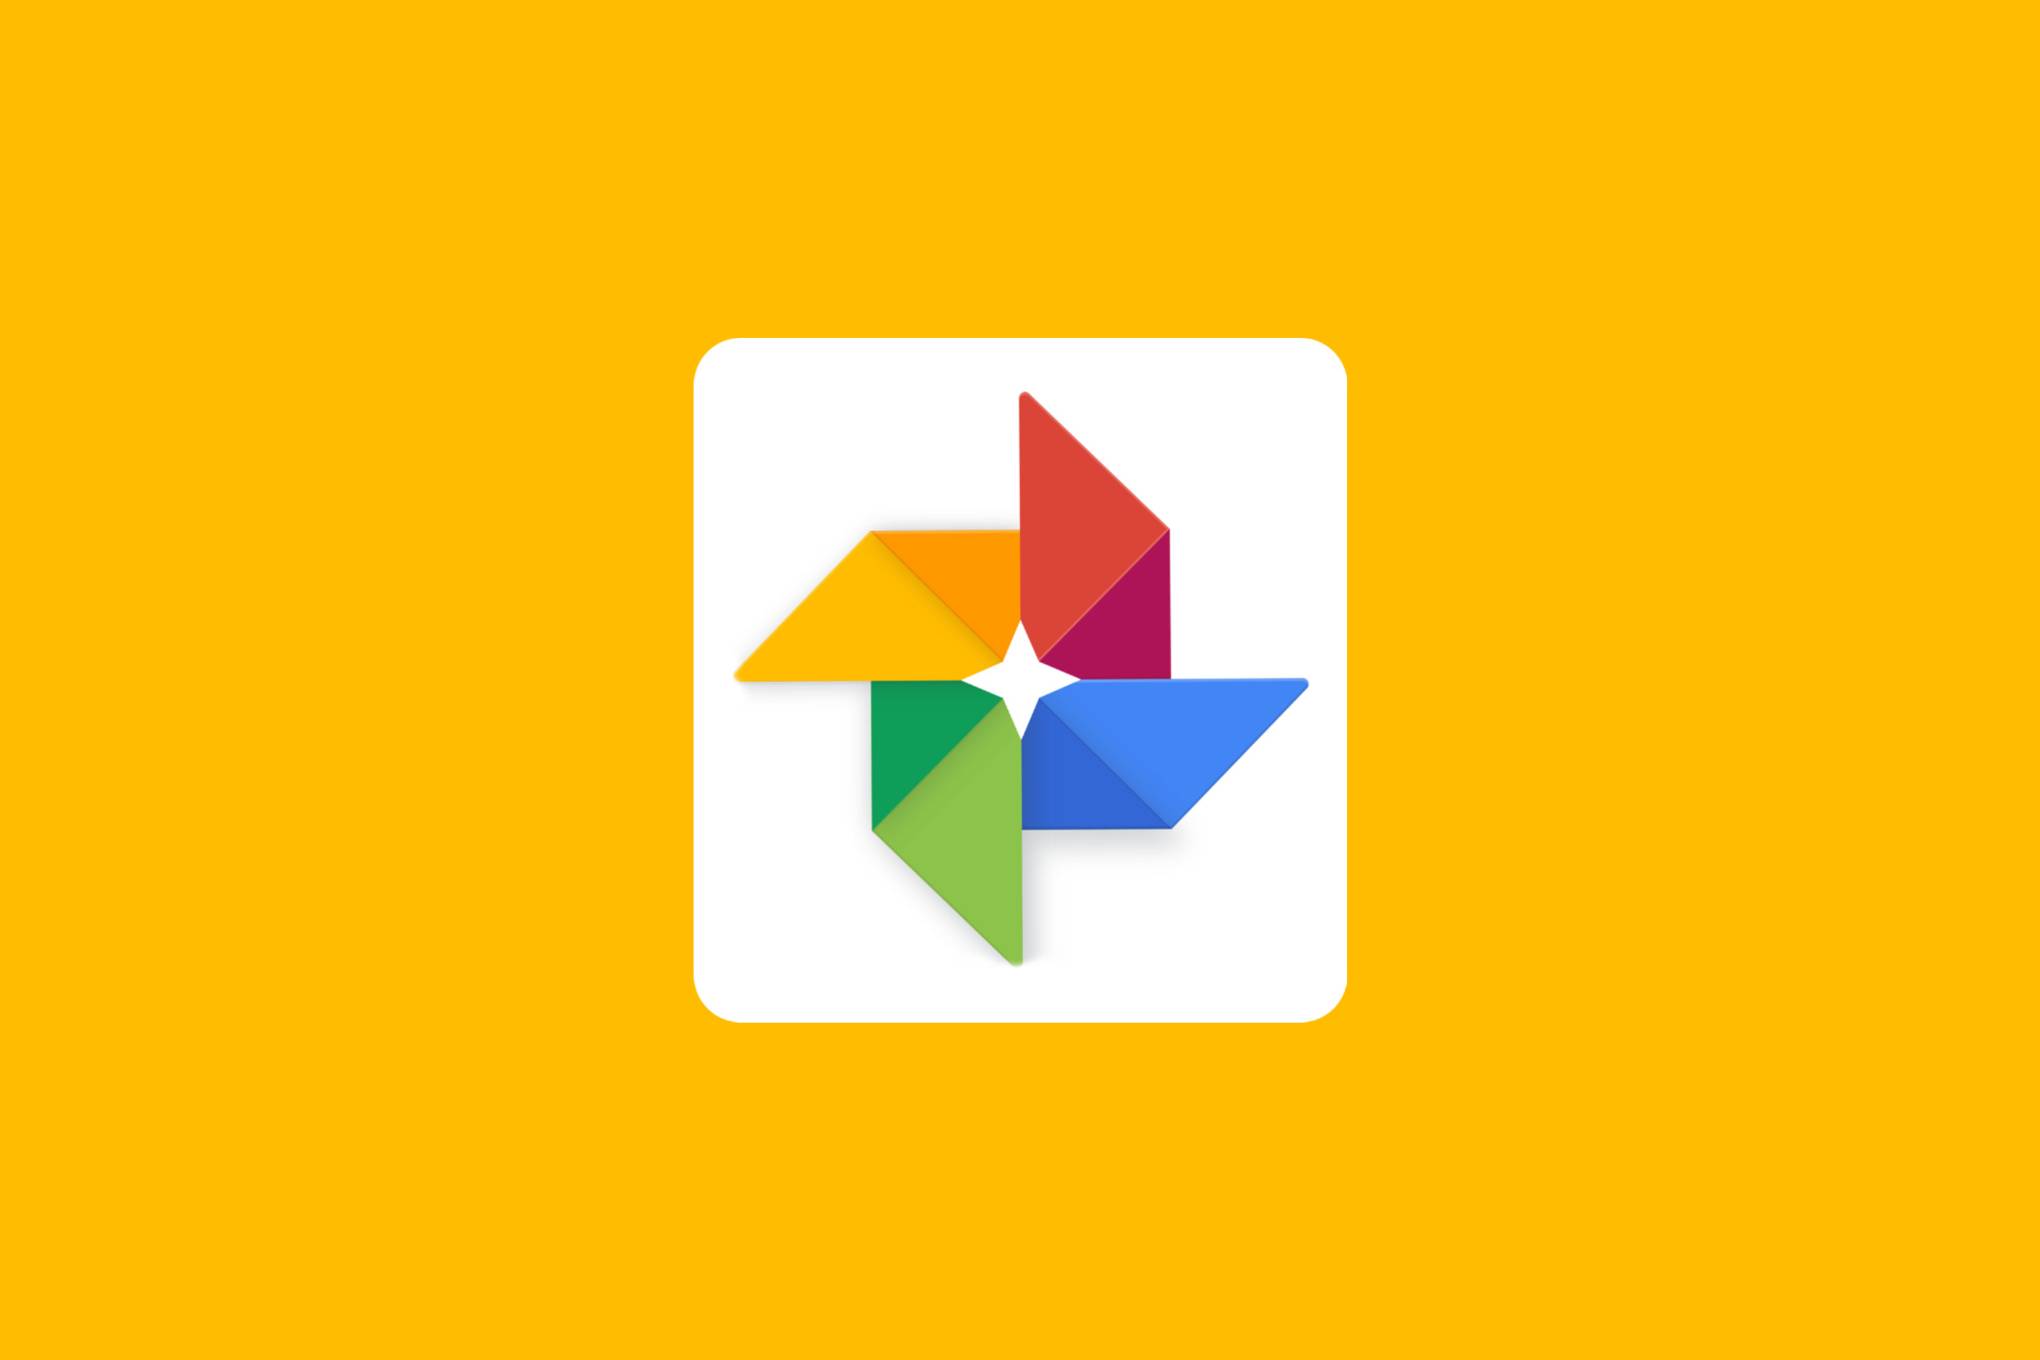 Google Photos is preparing to include paid features